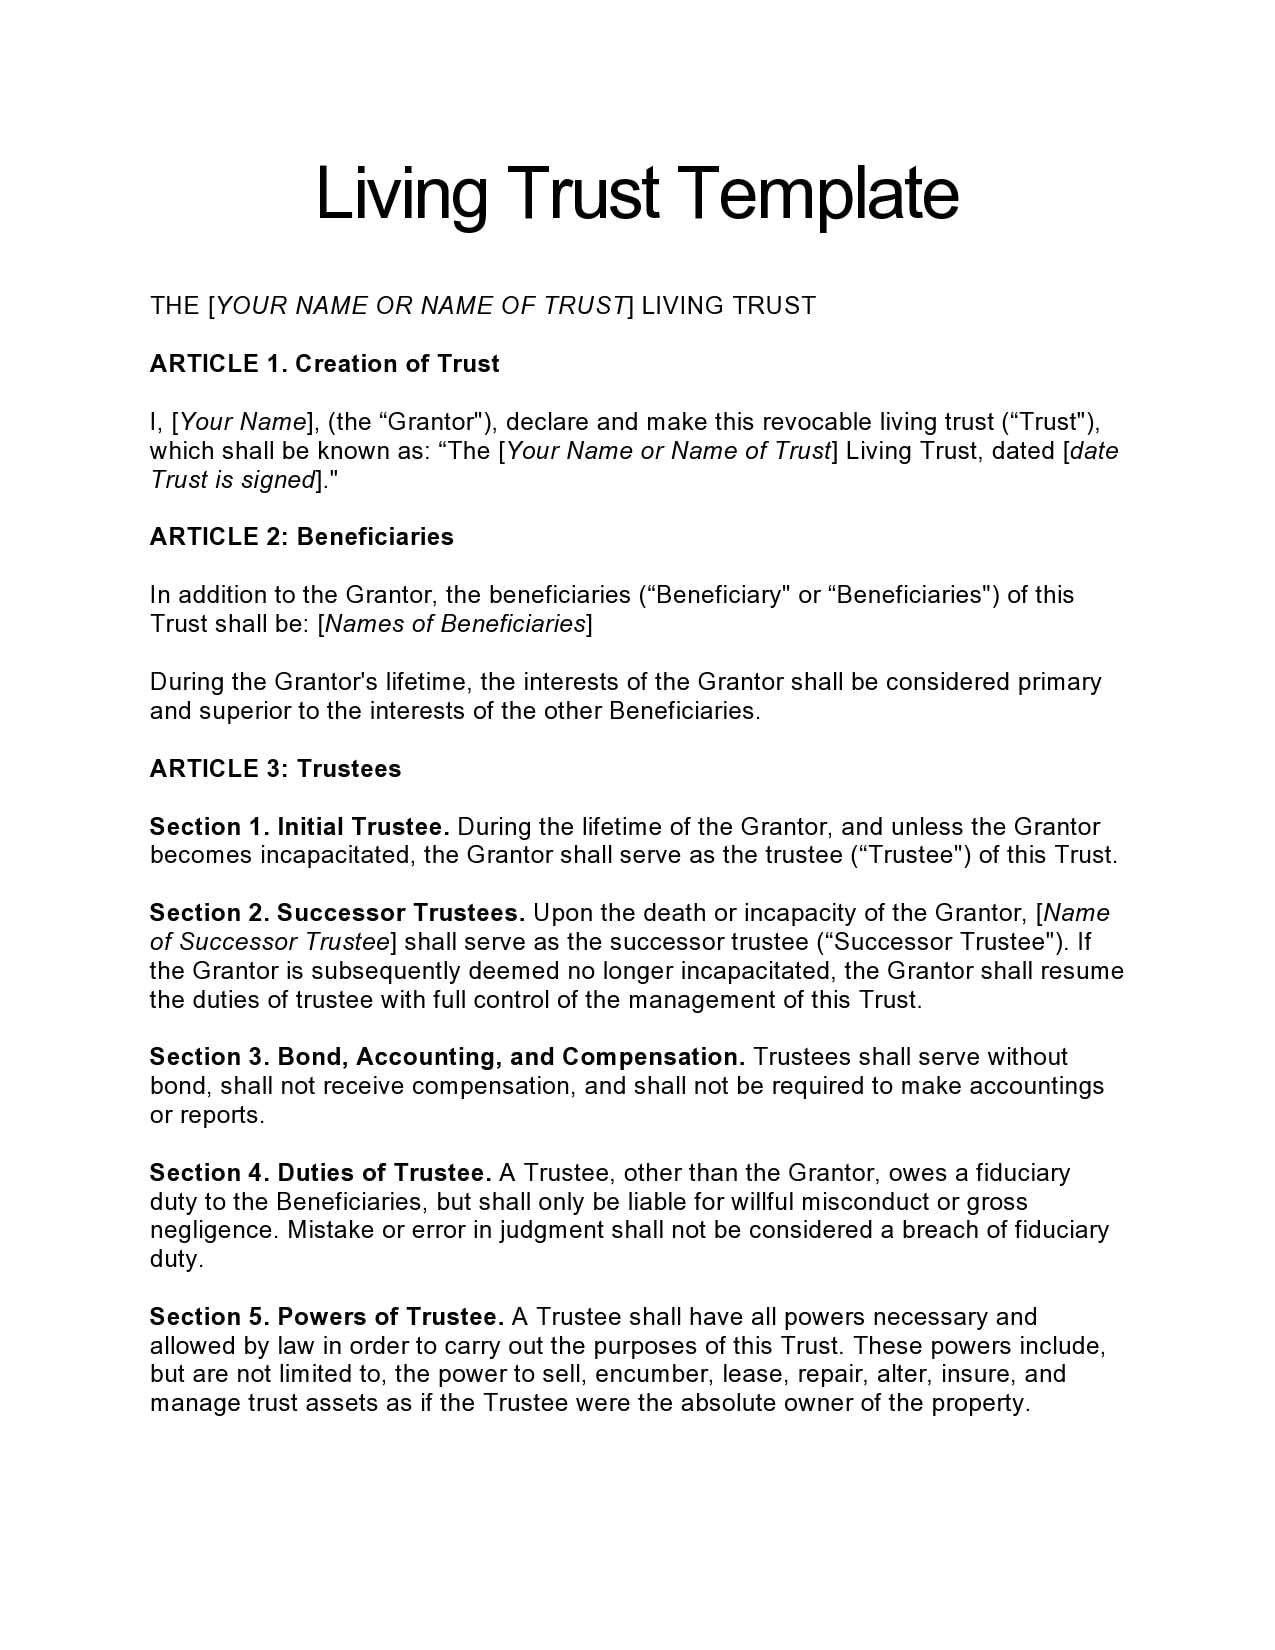 template-for-living-trust